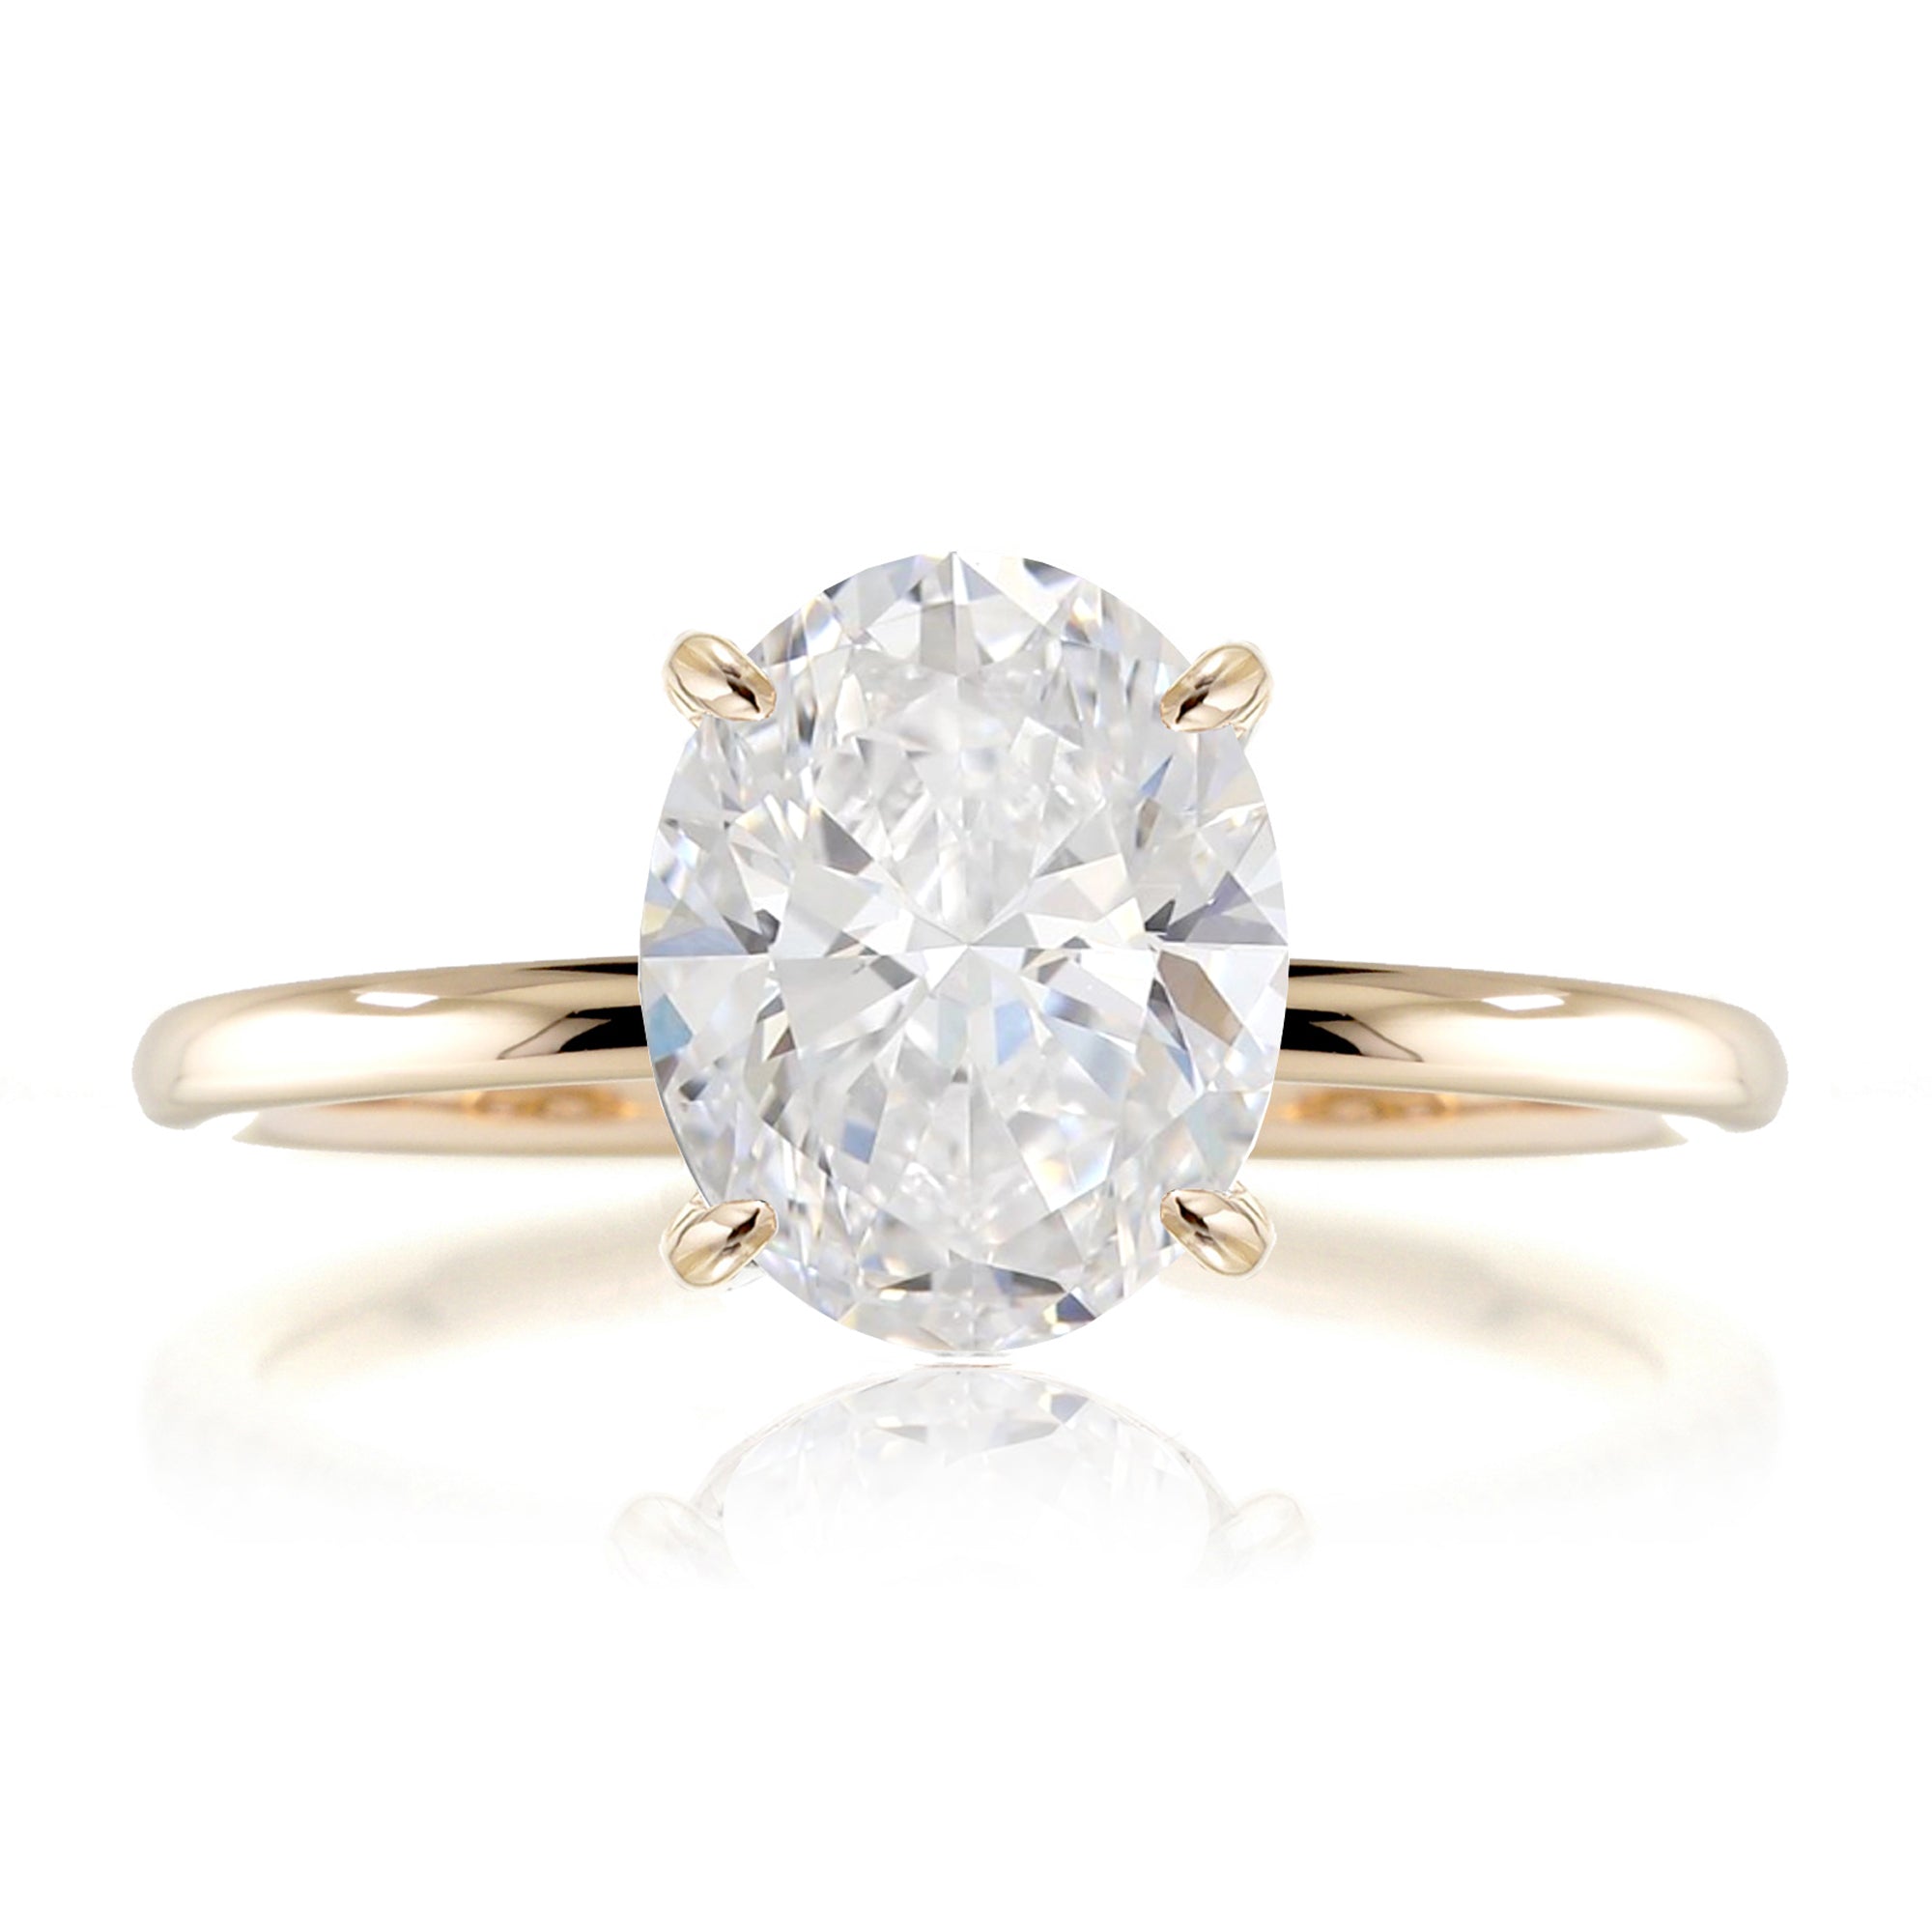 Oval cut lab-grown diamond engagement ring yellow gold - The Ava solid band